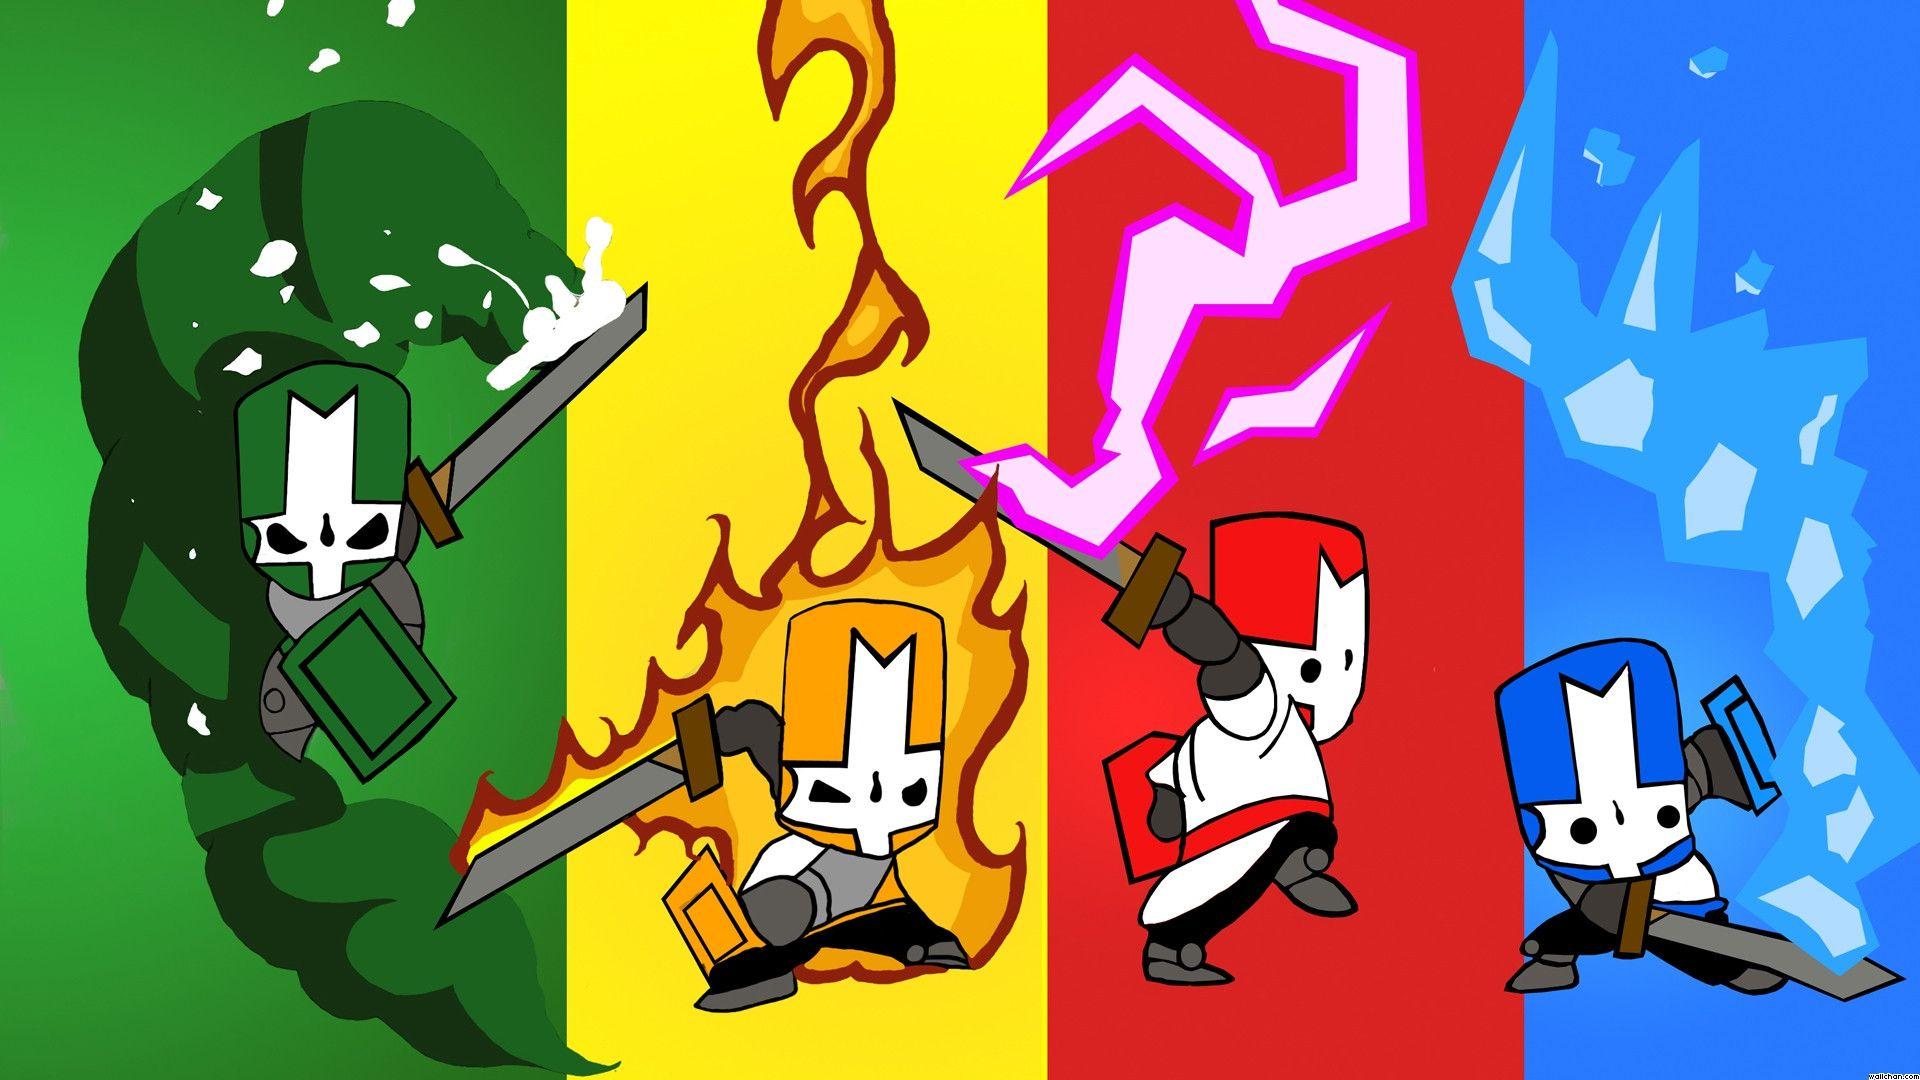 Castle Crashers Wallpapers - Top Free Castle Crashers Backgrounds